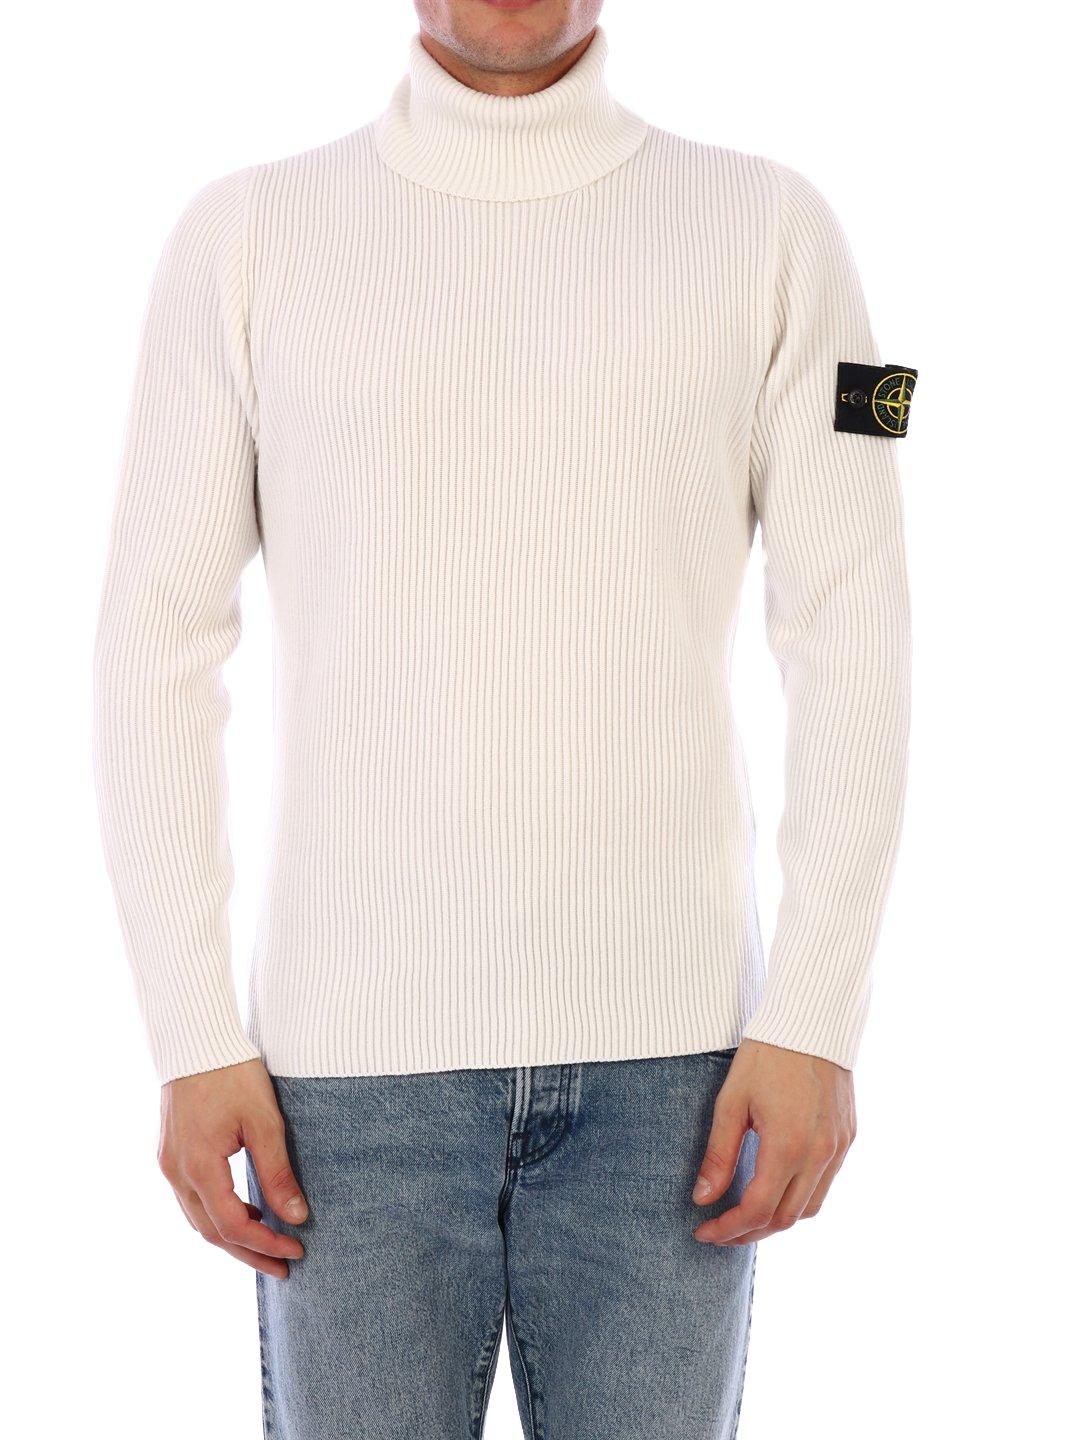 Stone Island Ribbed Wool Turtleneck Sweater in White for Men - Save 23% -  Lyst